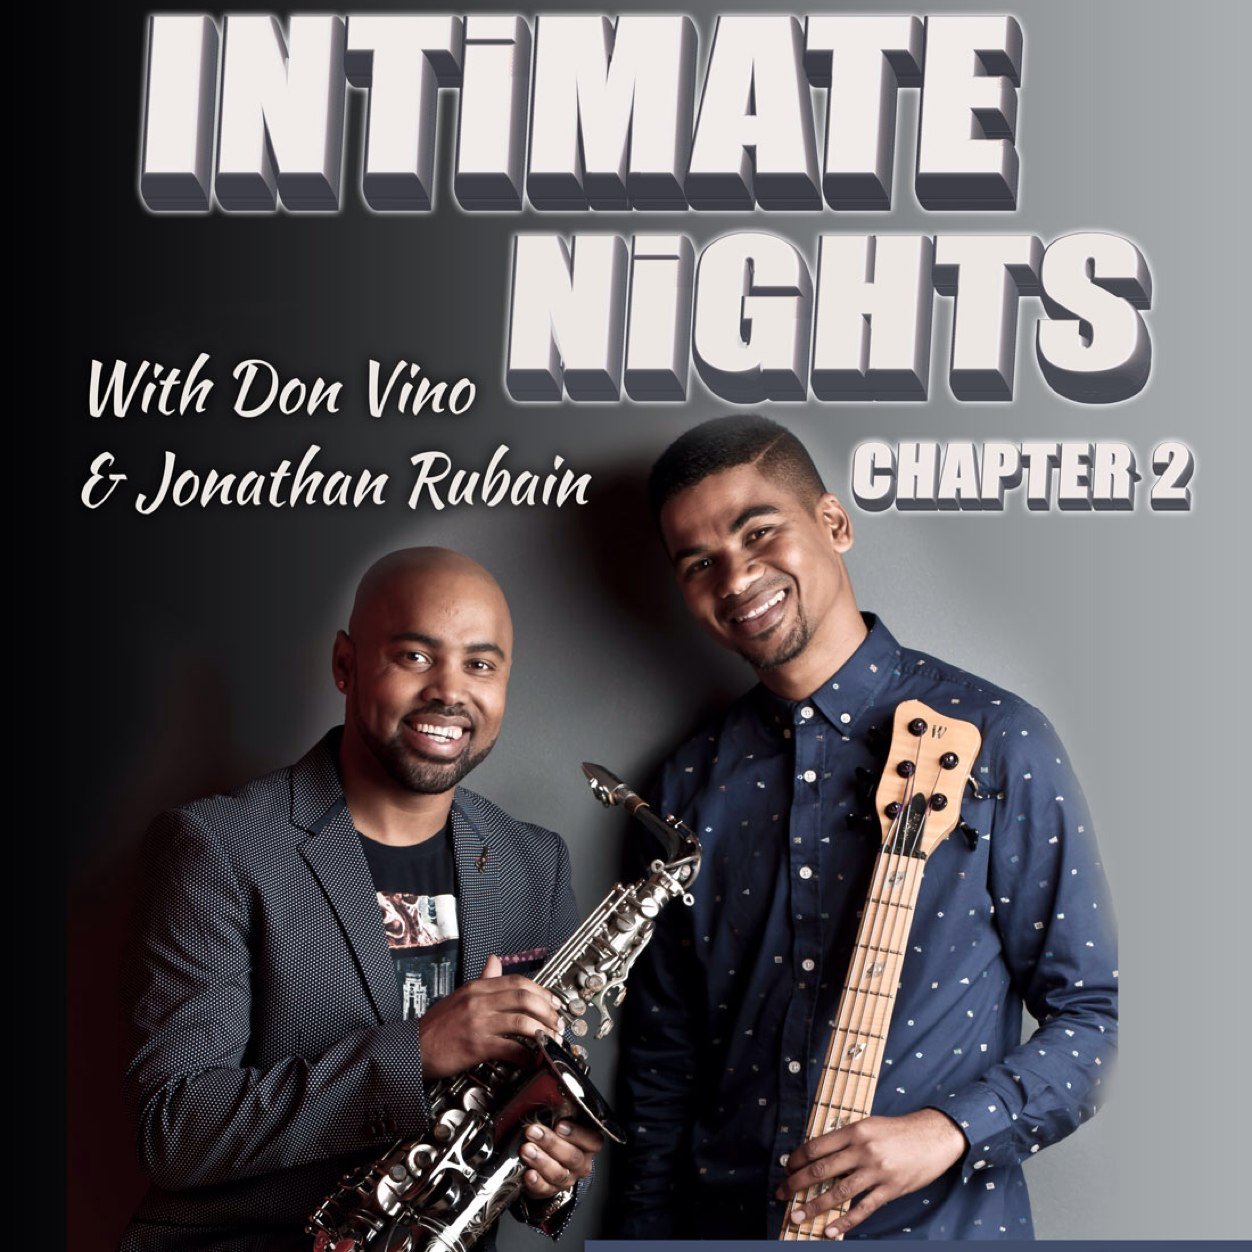 INTIMATE NIGHTS Chapter 2 live DvD & CD recording 4-6 Sep. at the Baxter Theatre. Book at Computicket or any Shoprite/Checkers or call Baxter on 0216857880